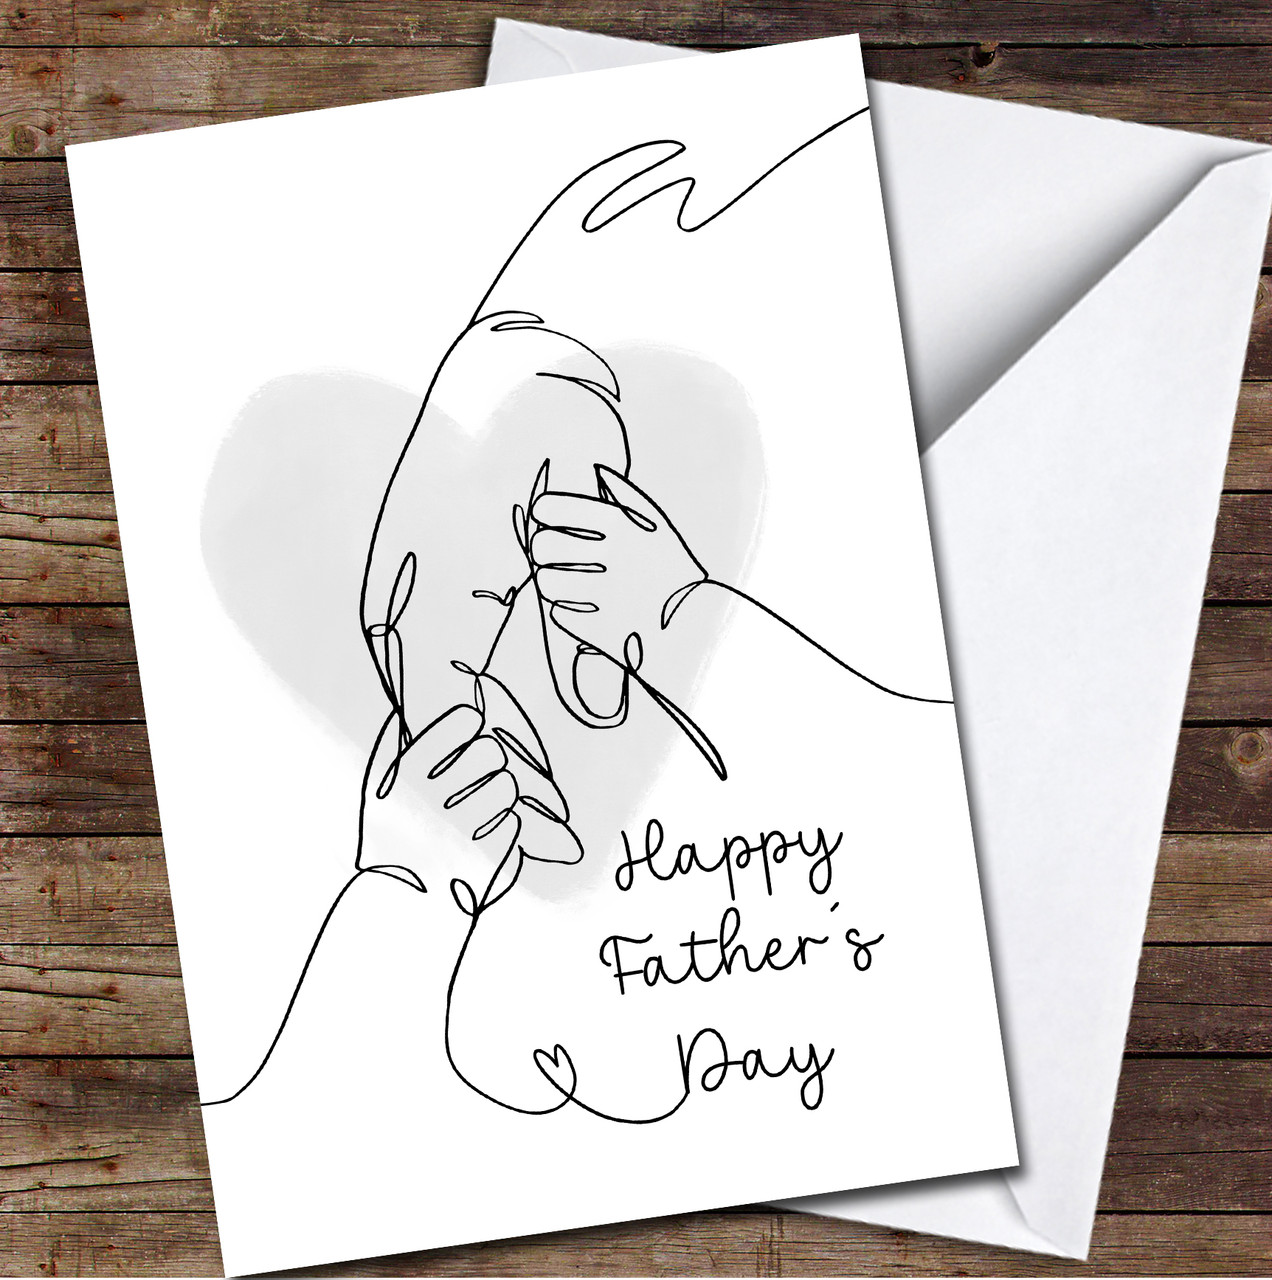 Father daughter drawing .. HAPPY FATHER's DAY... #doodleart #artwork | Easy  love drawings, Book art drawings, Meaningful drawings